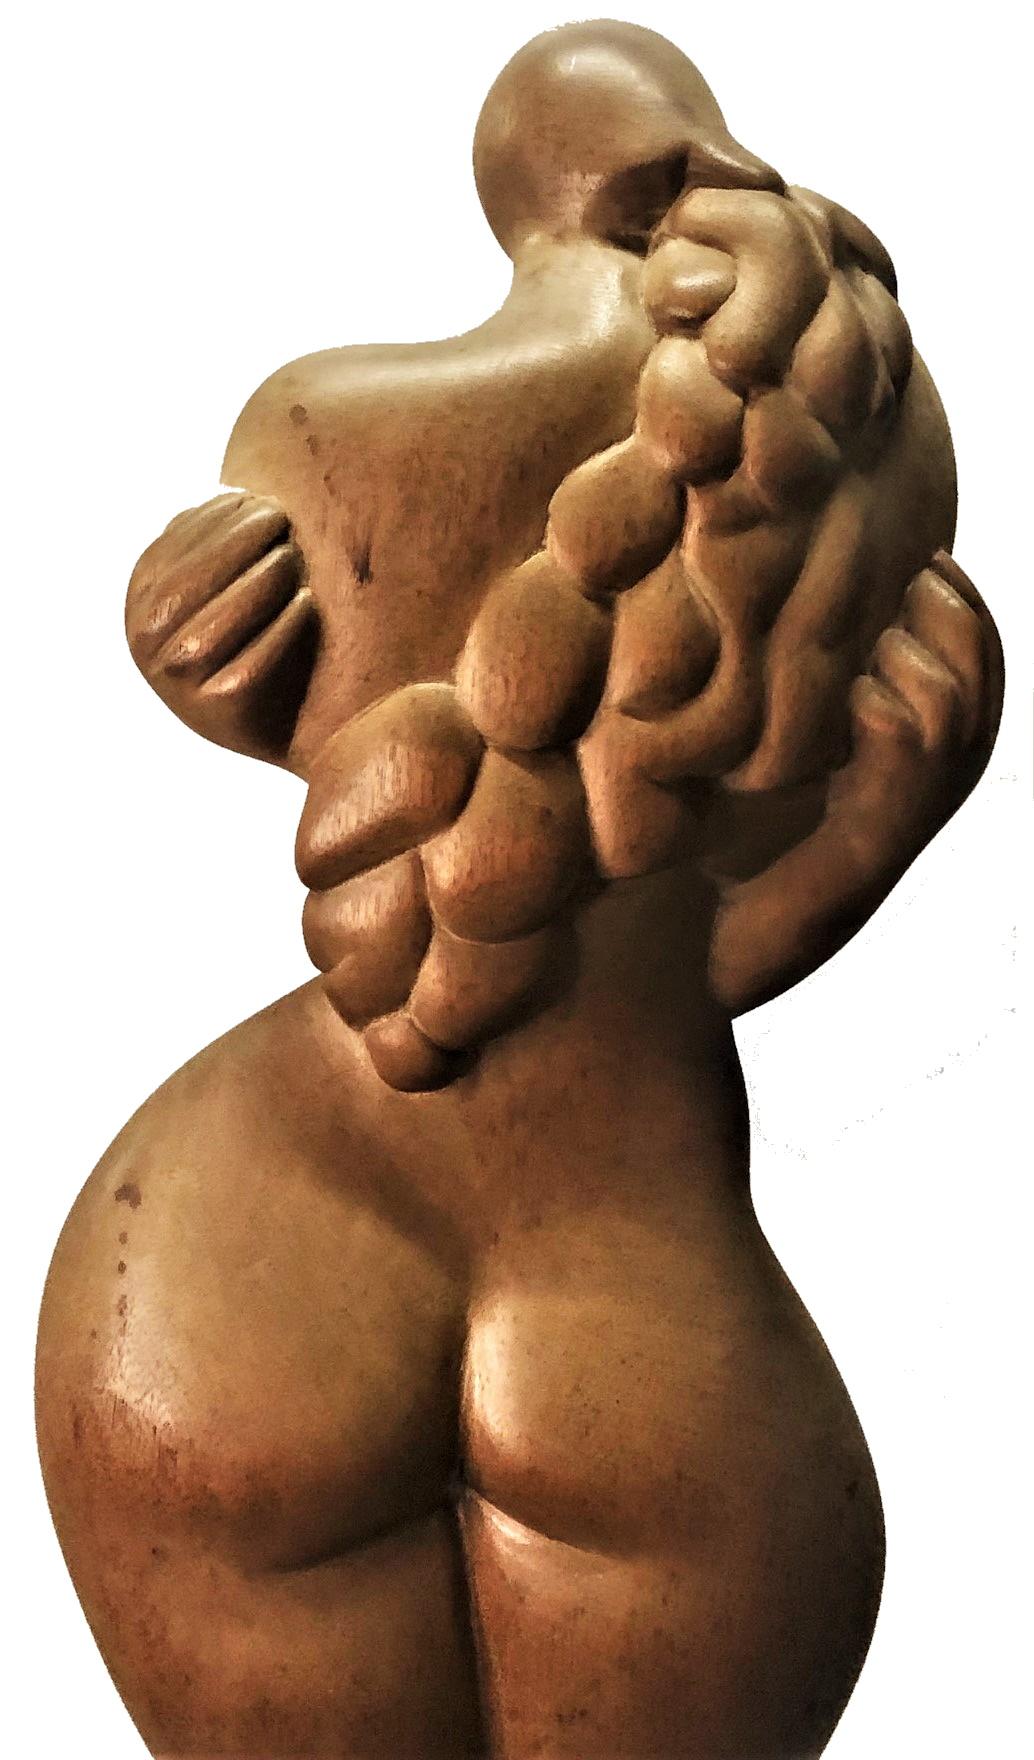 Self-Embrace, Mid-Century American Modern Wood Sculpture by Needle, Ca. 1960 For Sale 3